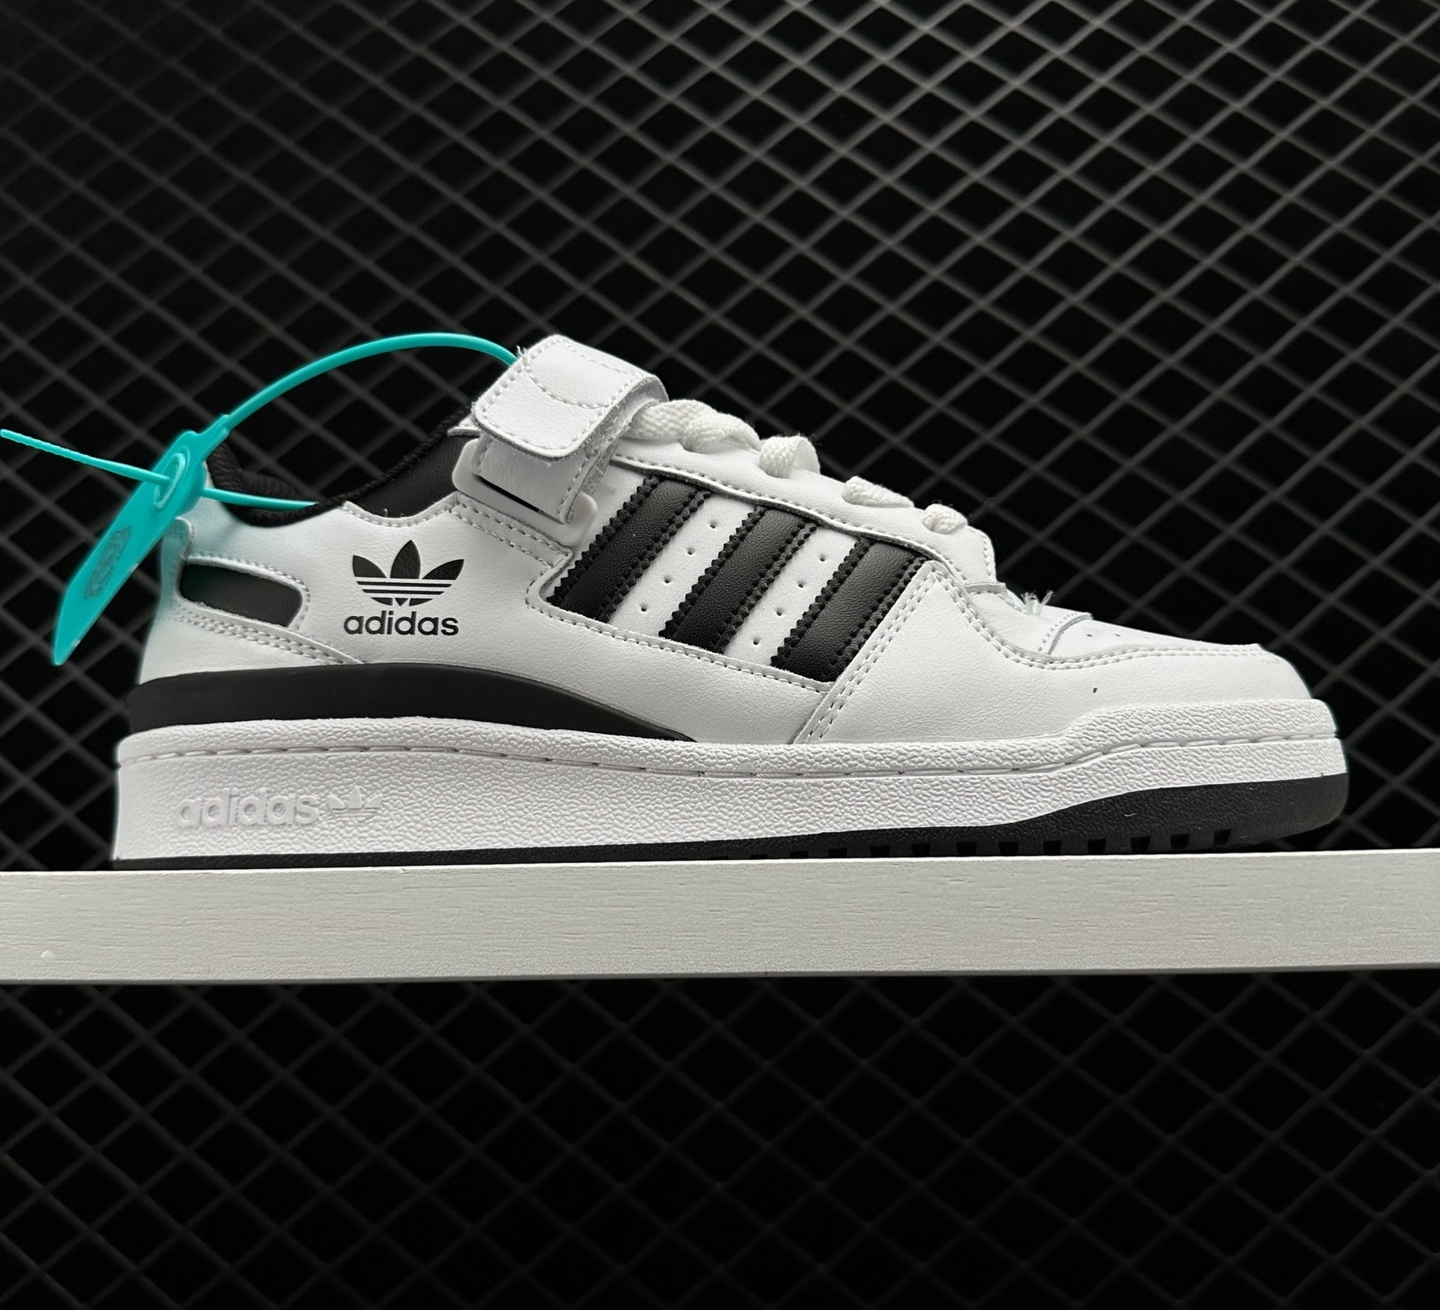 Adidas Forum Low 'White Black' - Shop the Latest Sneaker Styles Now